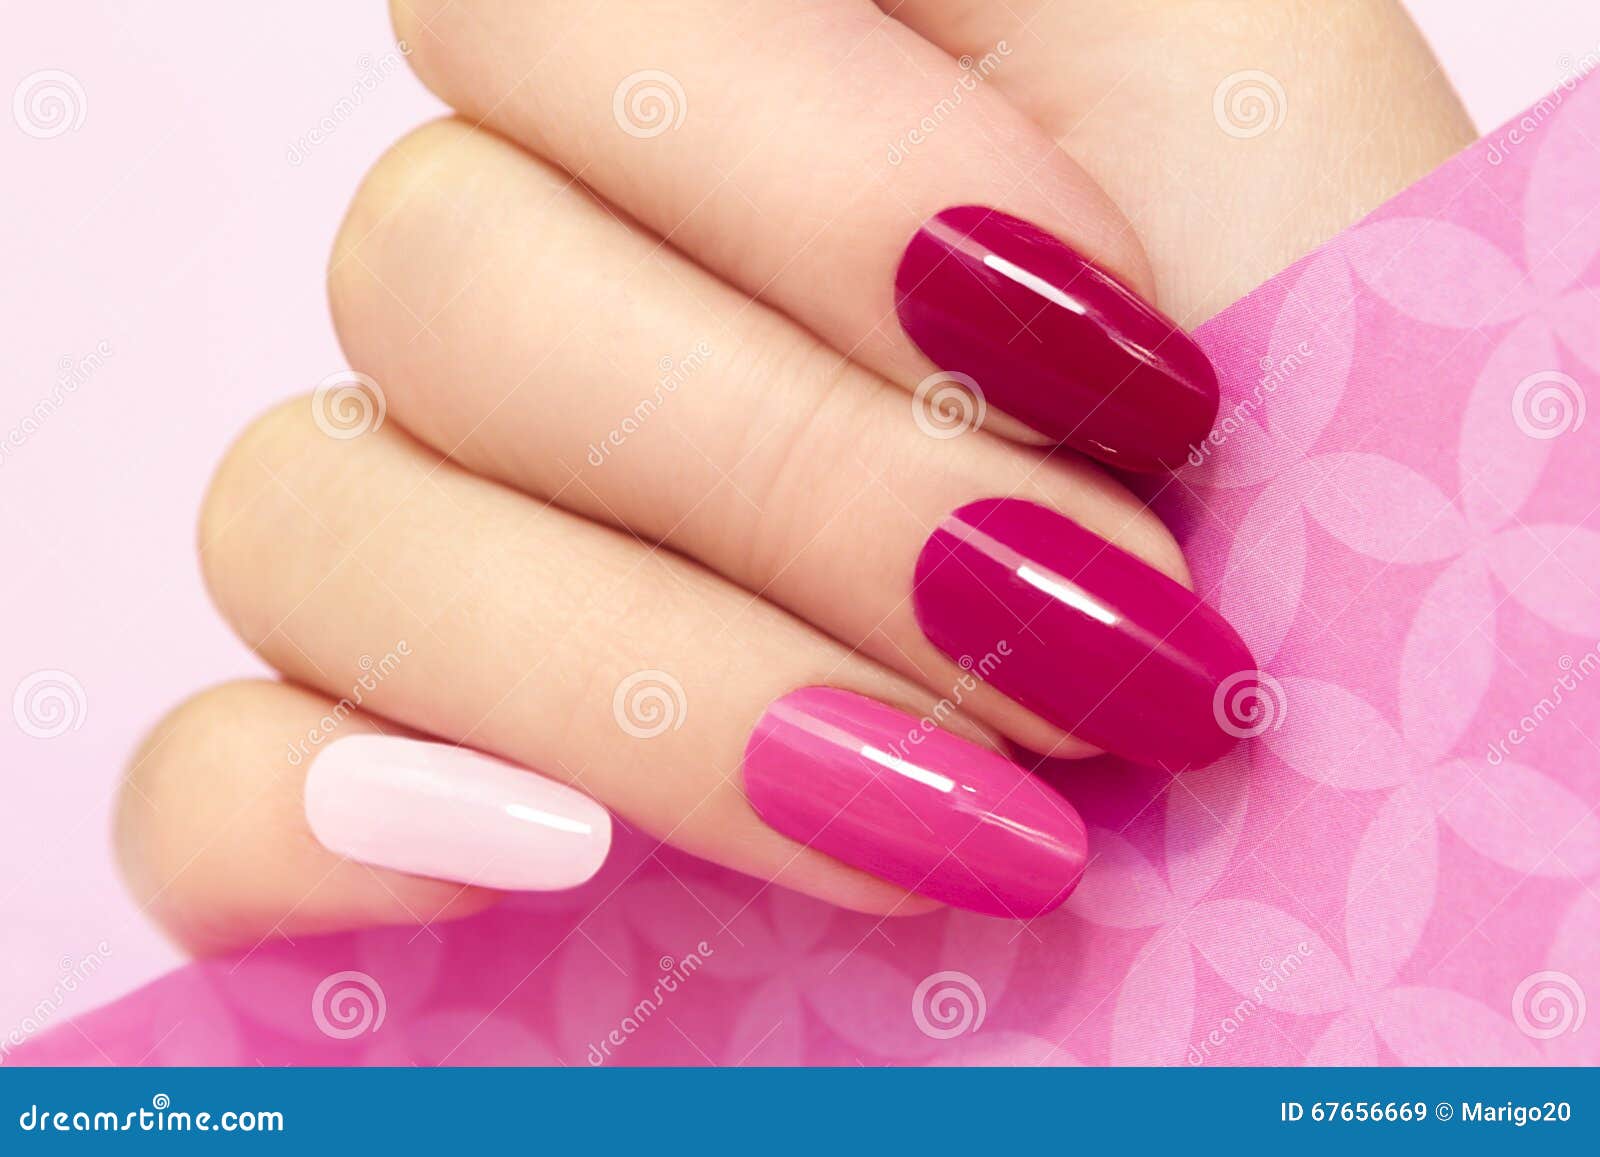 manicure in pink.